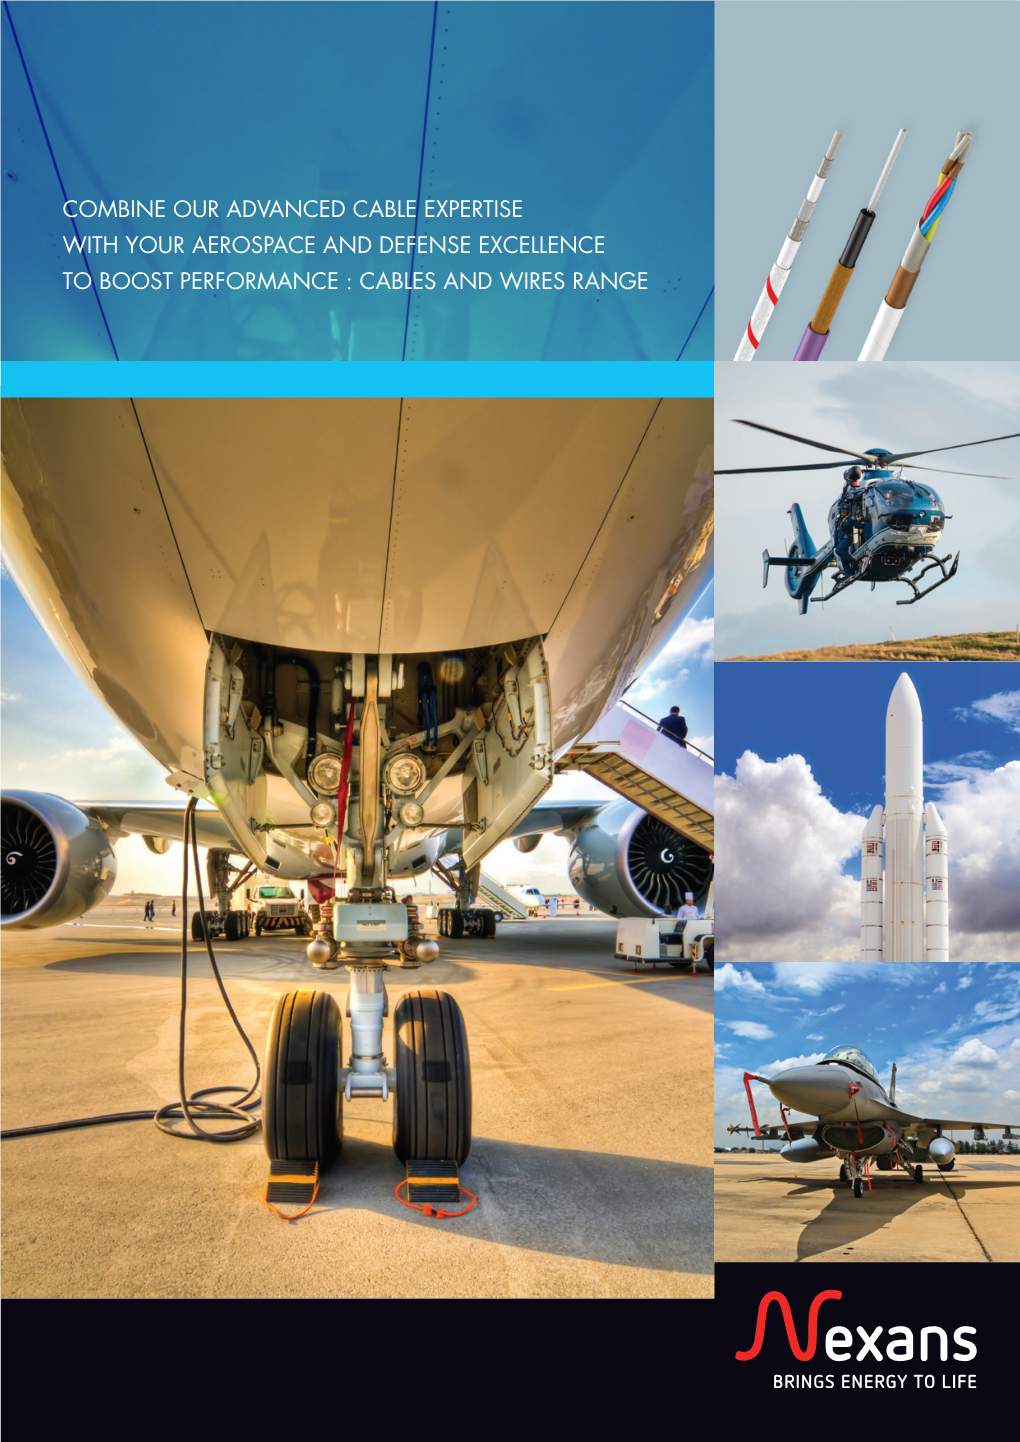 COMBINE OUR ADVANCED CABLE EXPERTISE with YOUR AEROSPACE and DEFENSE EXCELLENCE to BOOST PERFORMANCE : CABLES and WIRES RANGE Summary